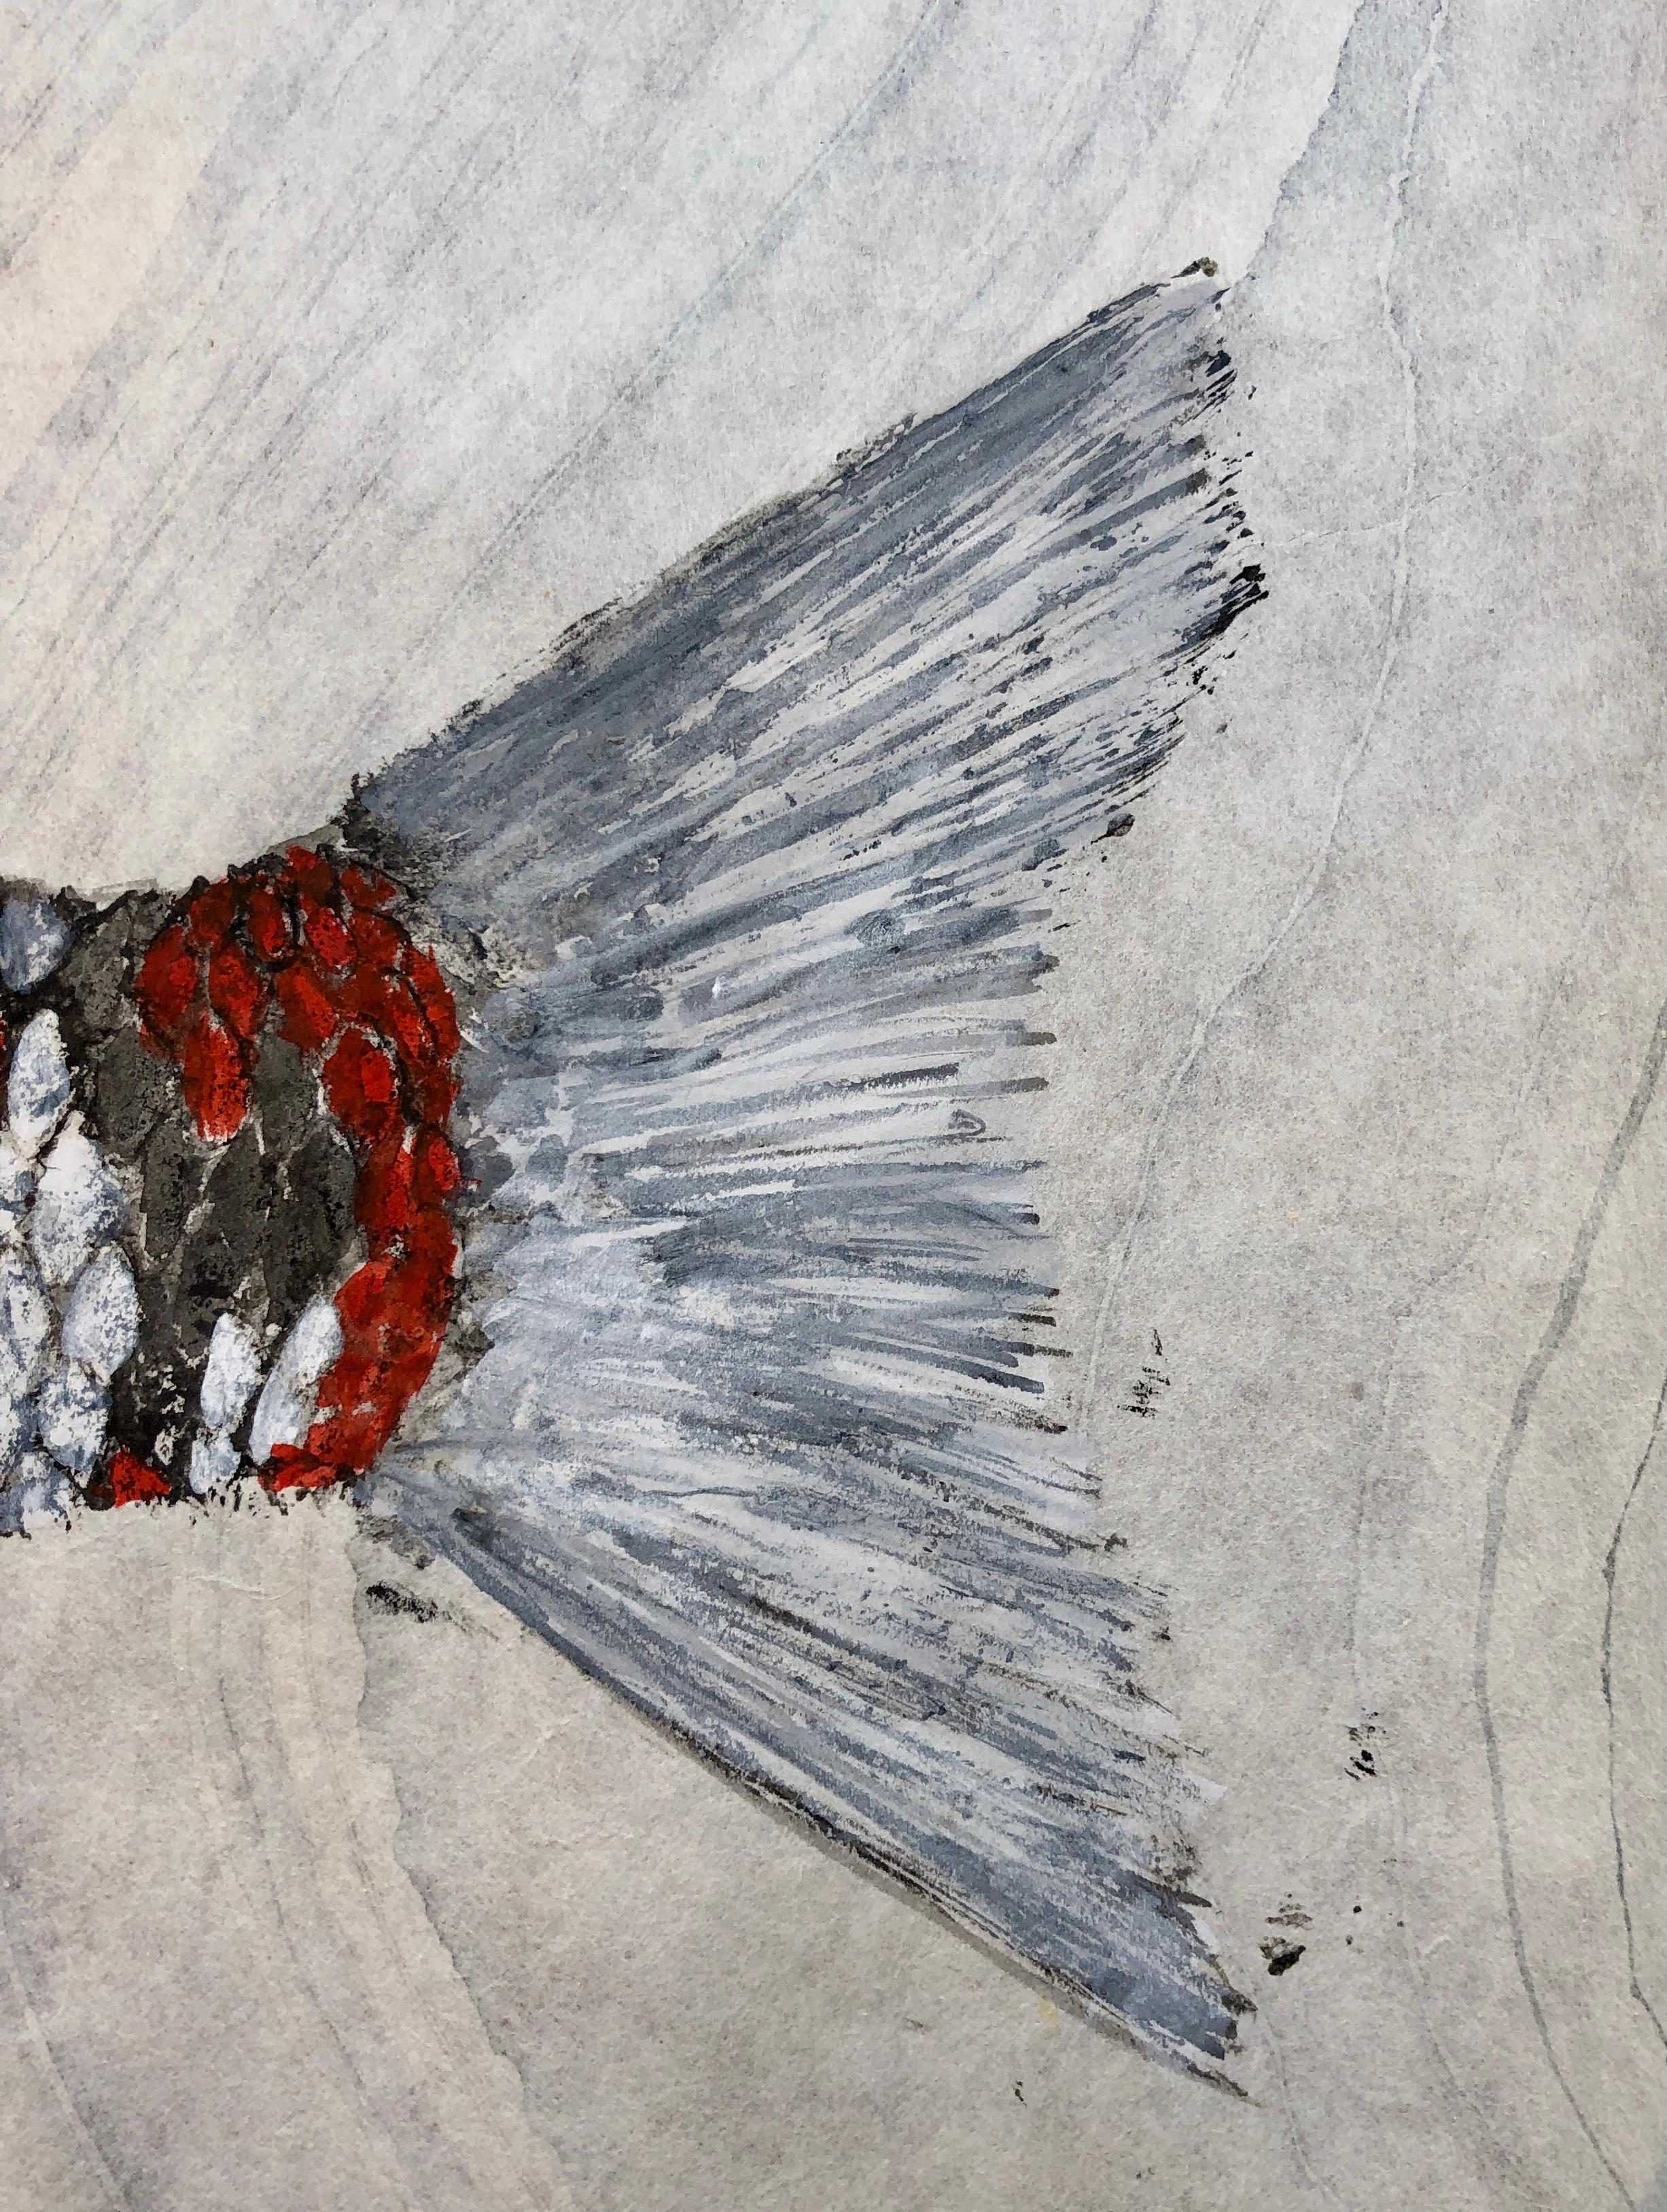 About 100 years ago in Japan, fishermen created gyotaku prints to record their prized catches. Gyotaku is created by pressing rice paper onto a fish covered with ink or paint.  An avid fisherman himself, Conroy caught this carp to create this